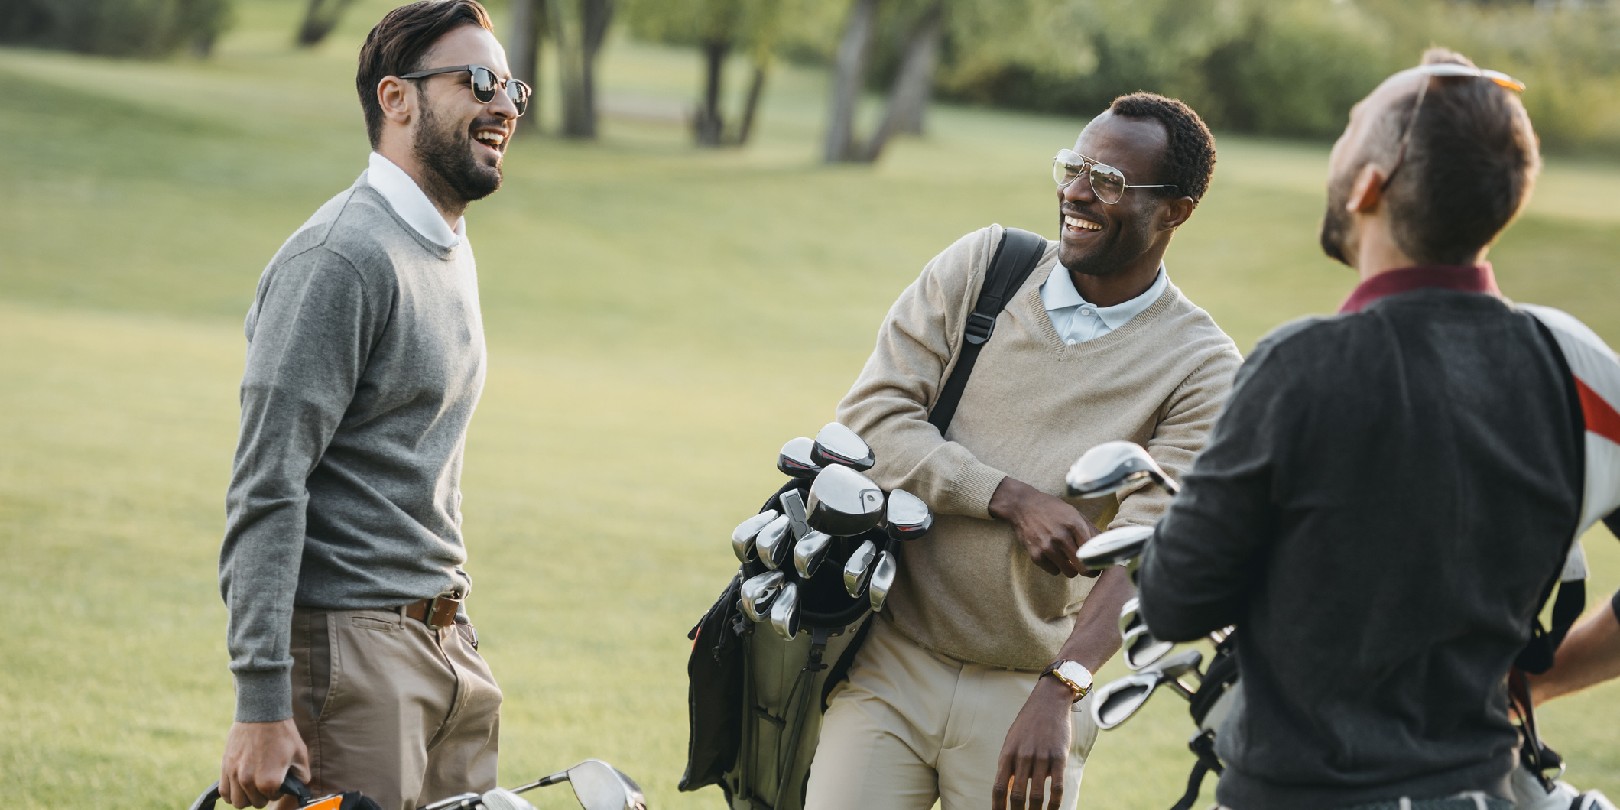 multiethnic golf players with golf clubs having fun on golf course